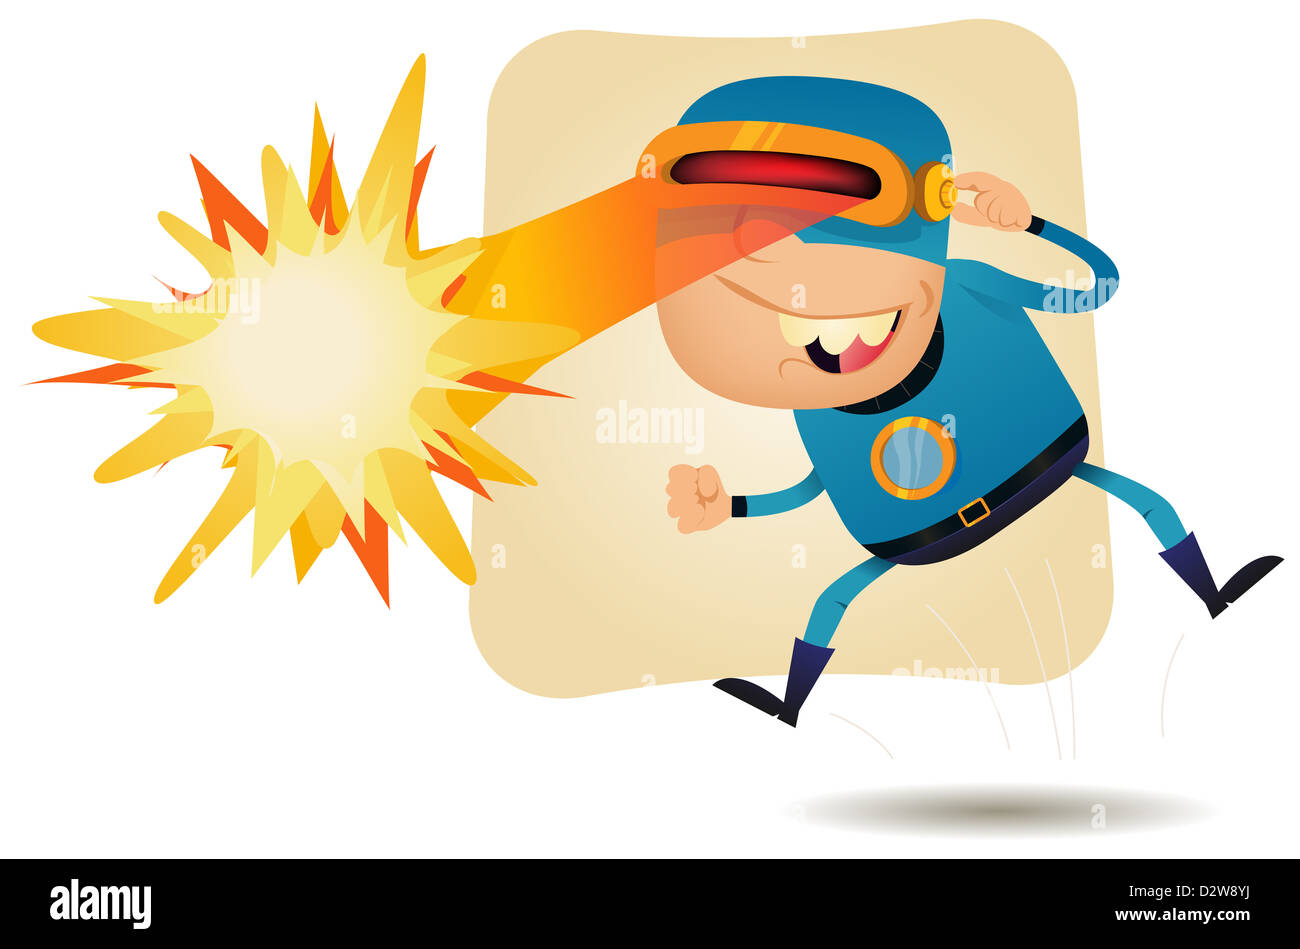 Illustration of a funny cartoon superhero character using his super power,  laser blast from the eyes Stock Photo - Alamy